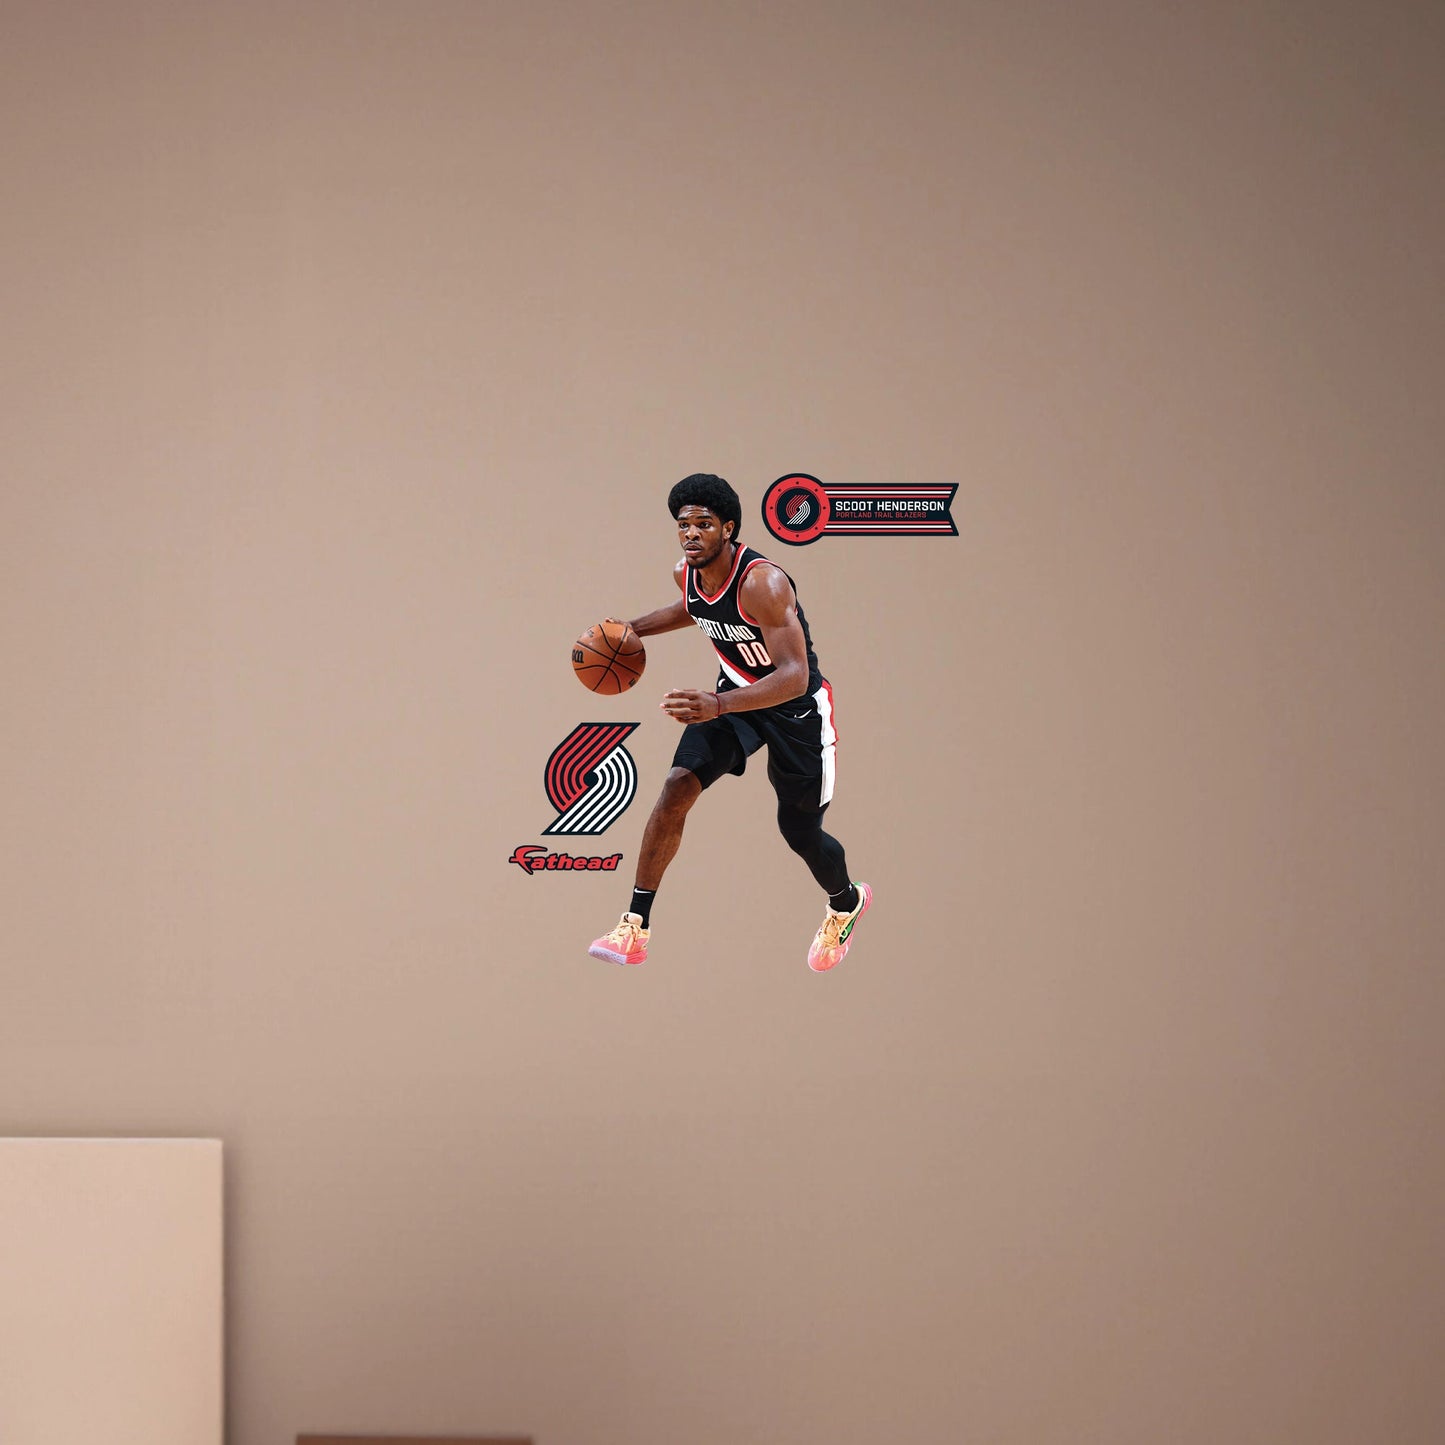 Portland Trail Blazers: Scoot Henderson         - Officially Licensed NBA Removable     Adhesive Decal